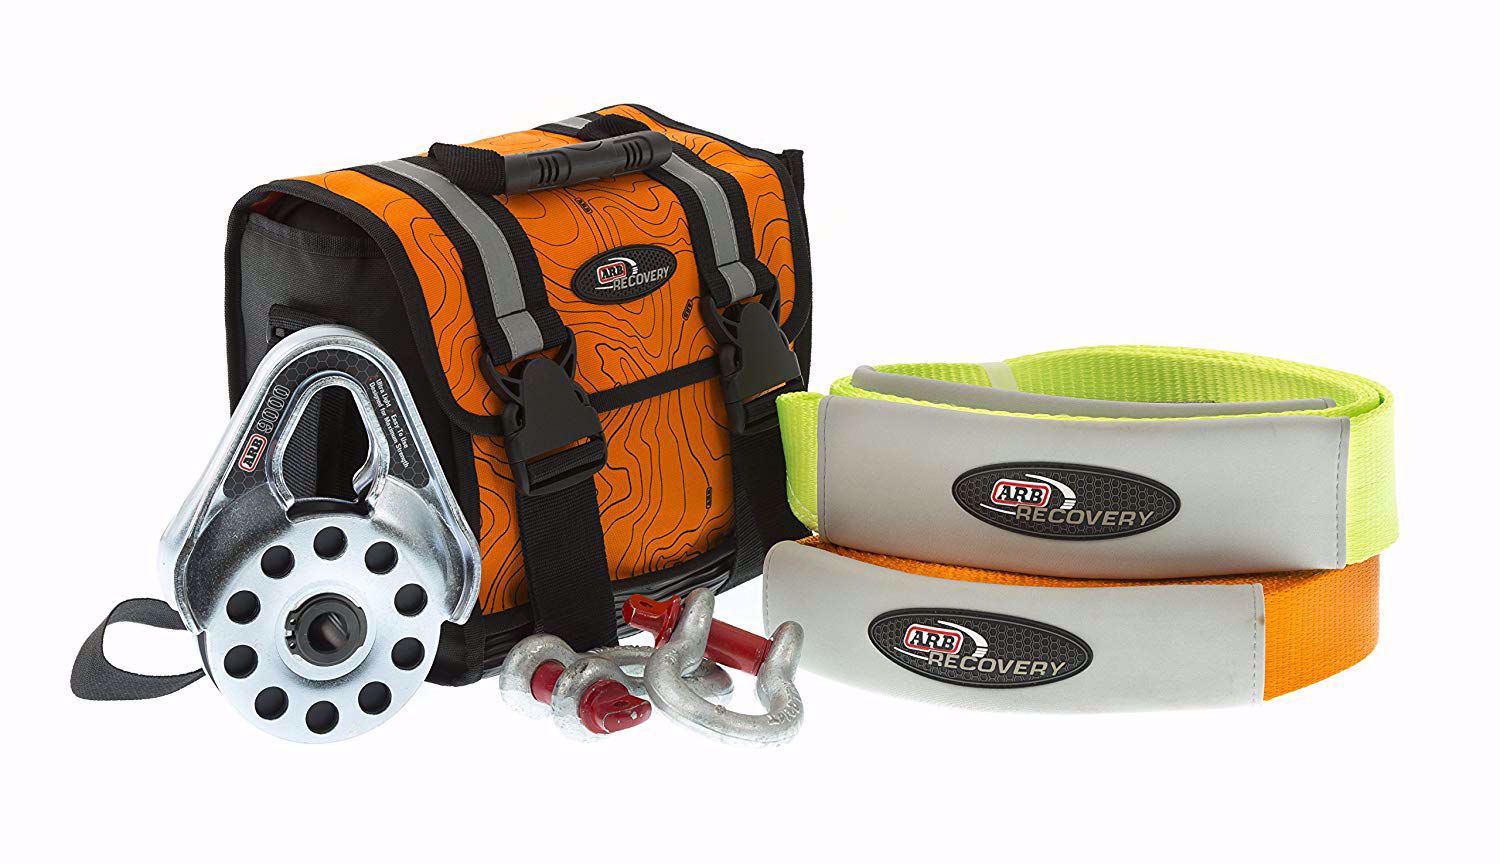 Alldogs Offroad Coop. ARB RK11 Recovery Essentials Kit